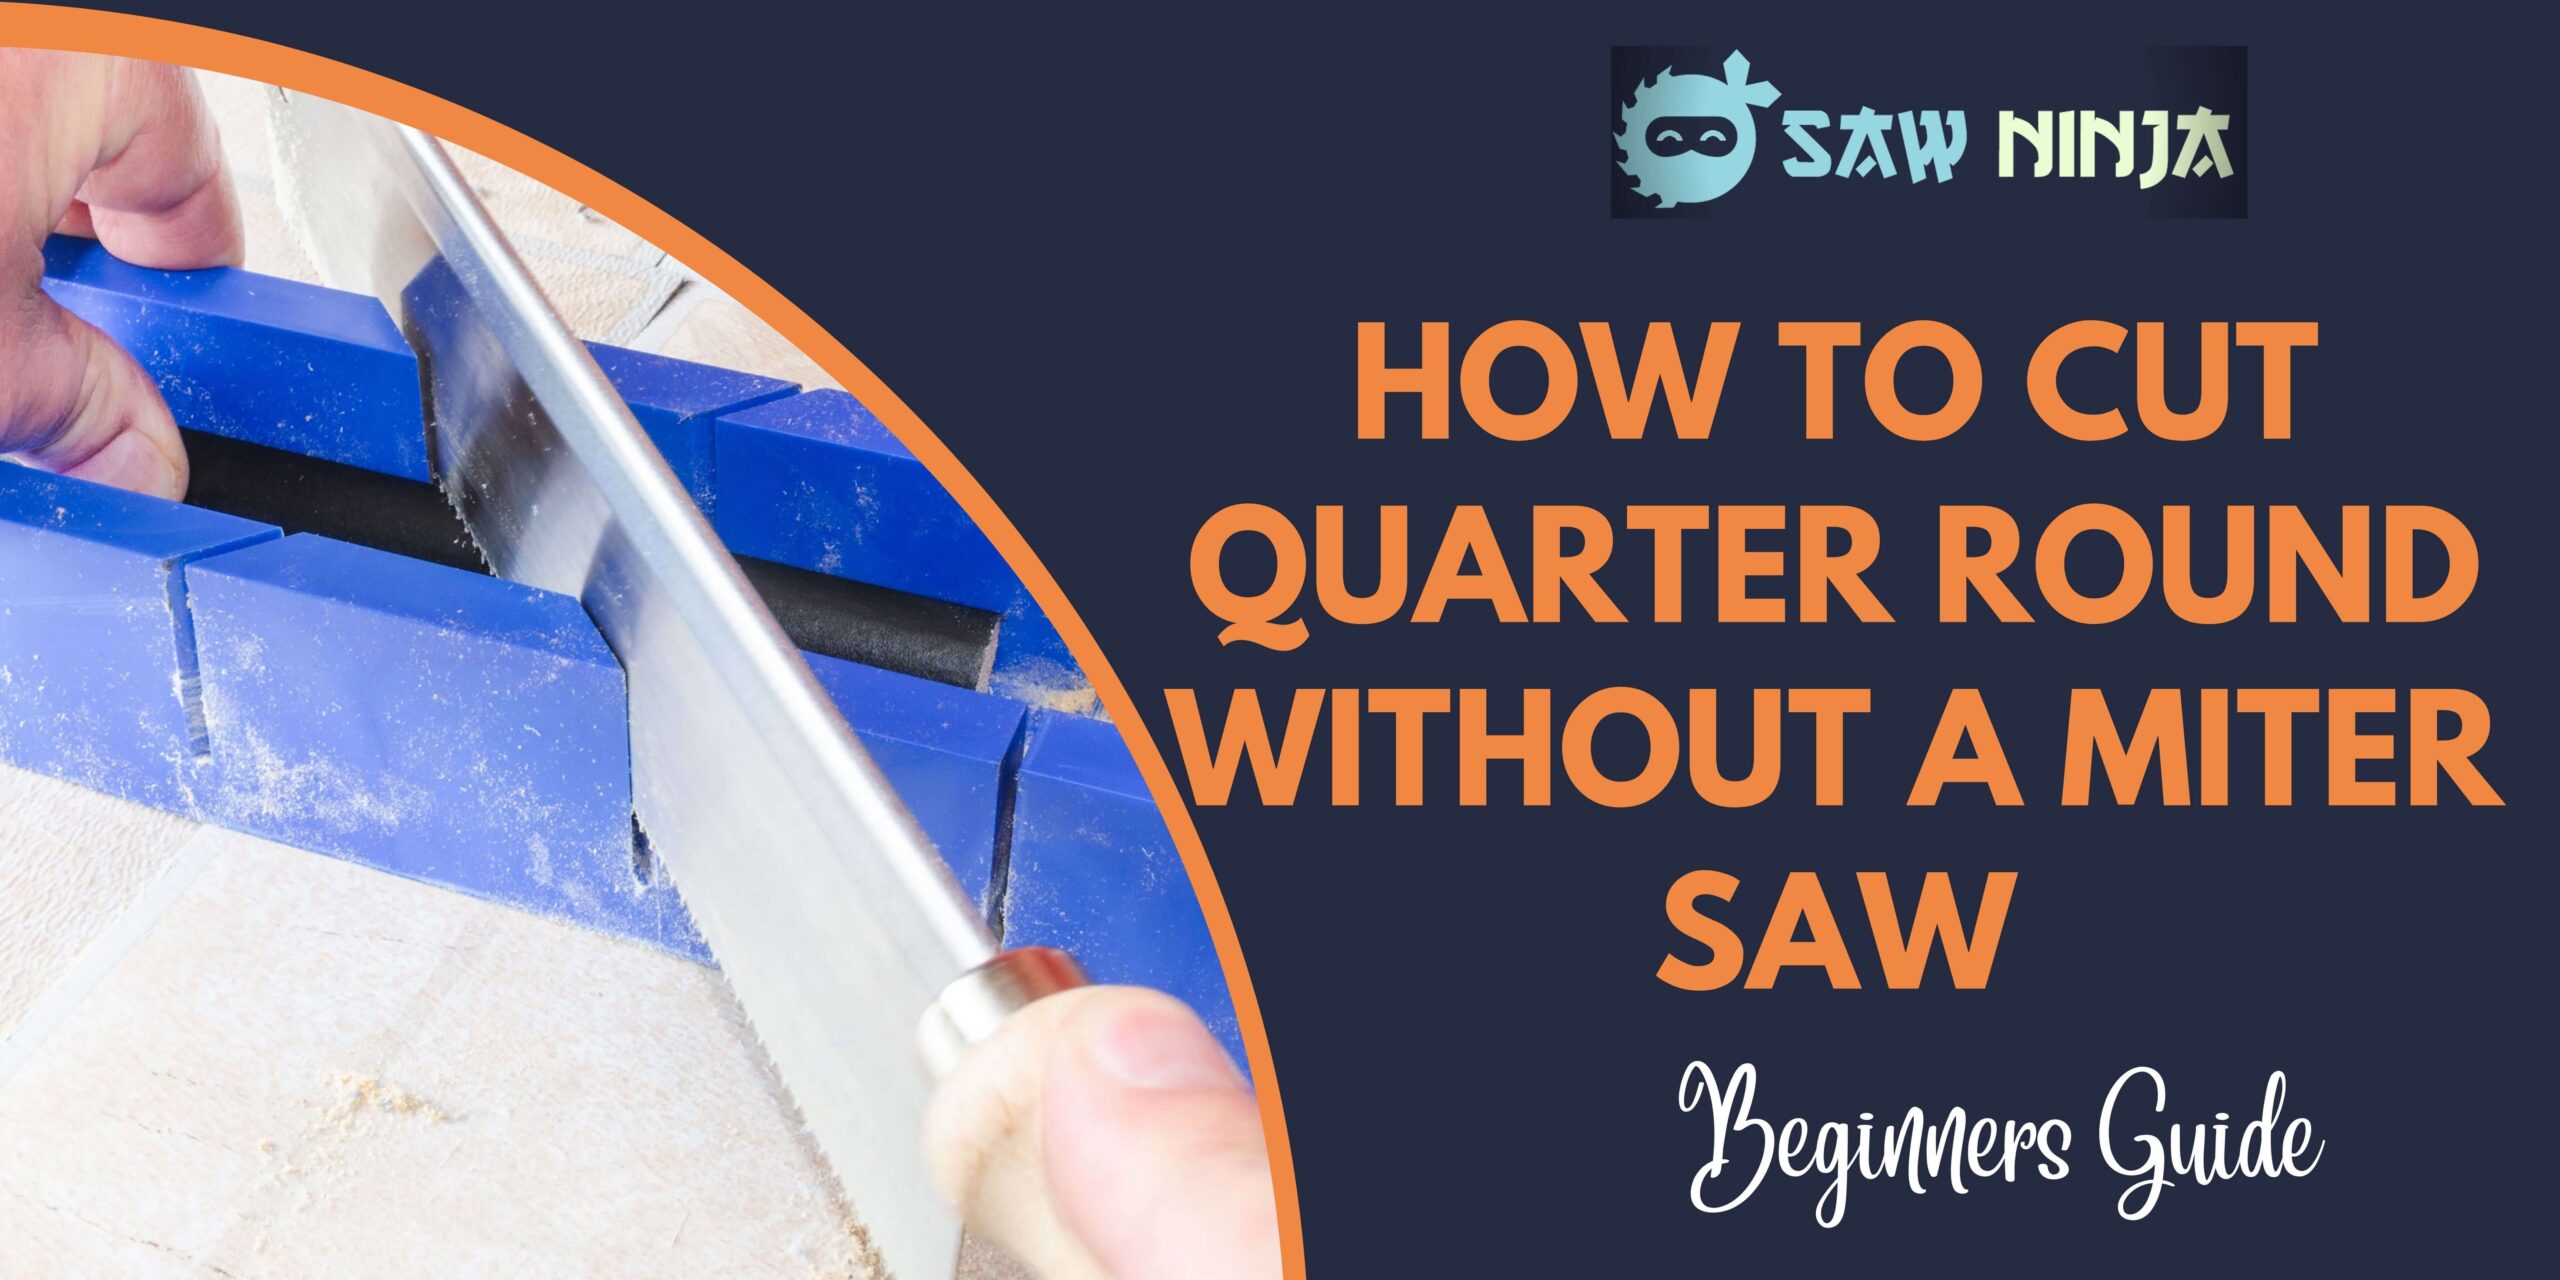 How to Cut Quarter Round Without a Miter Saw